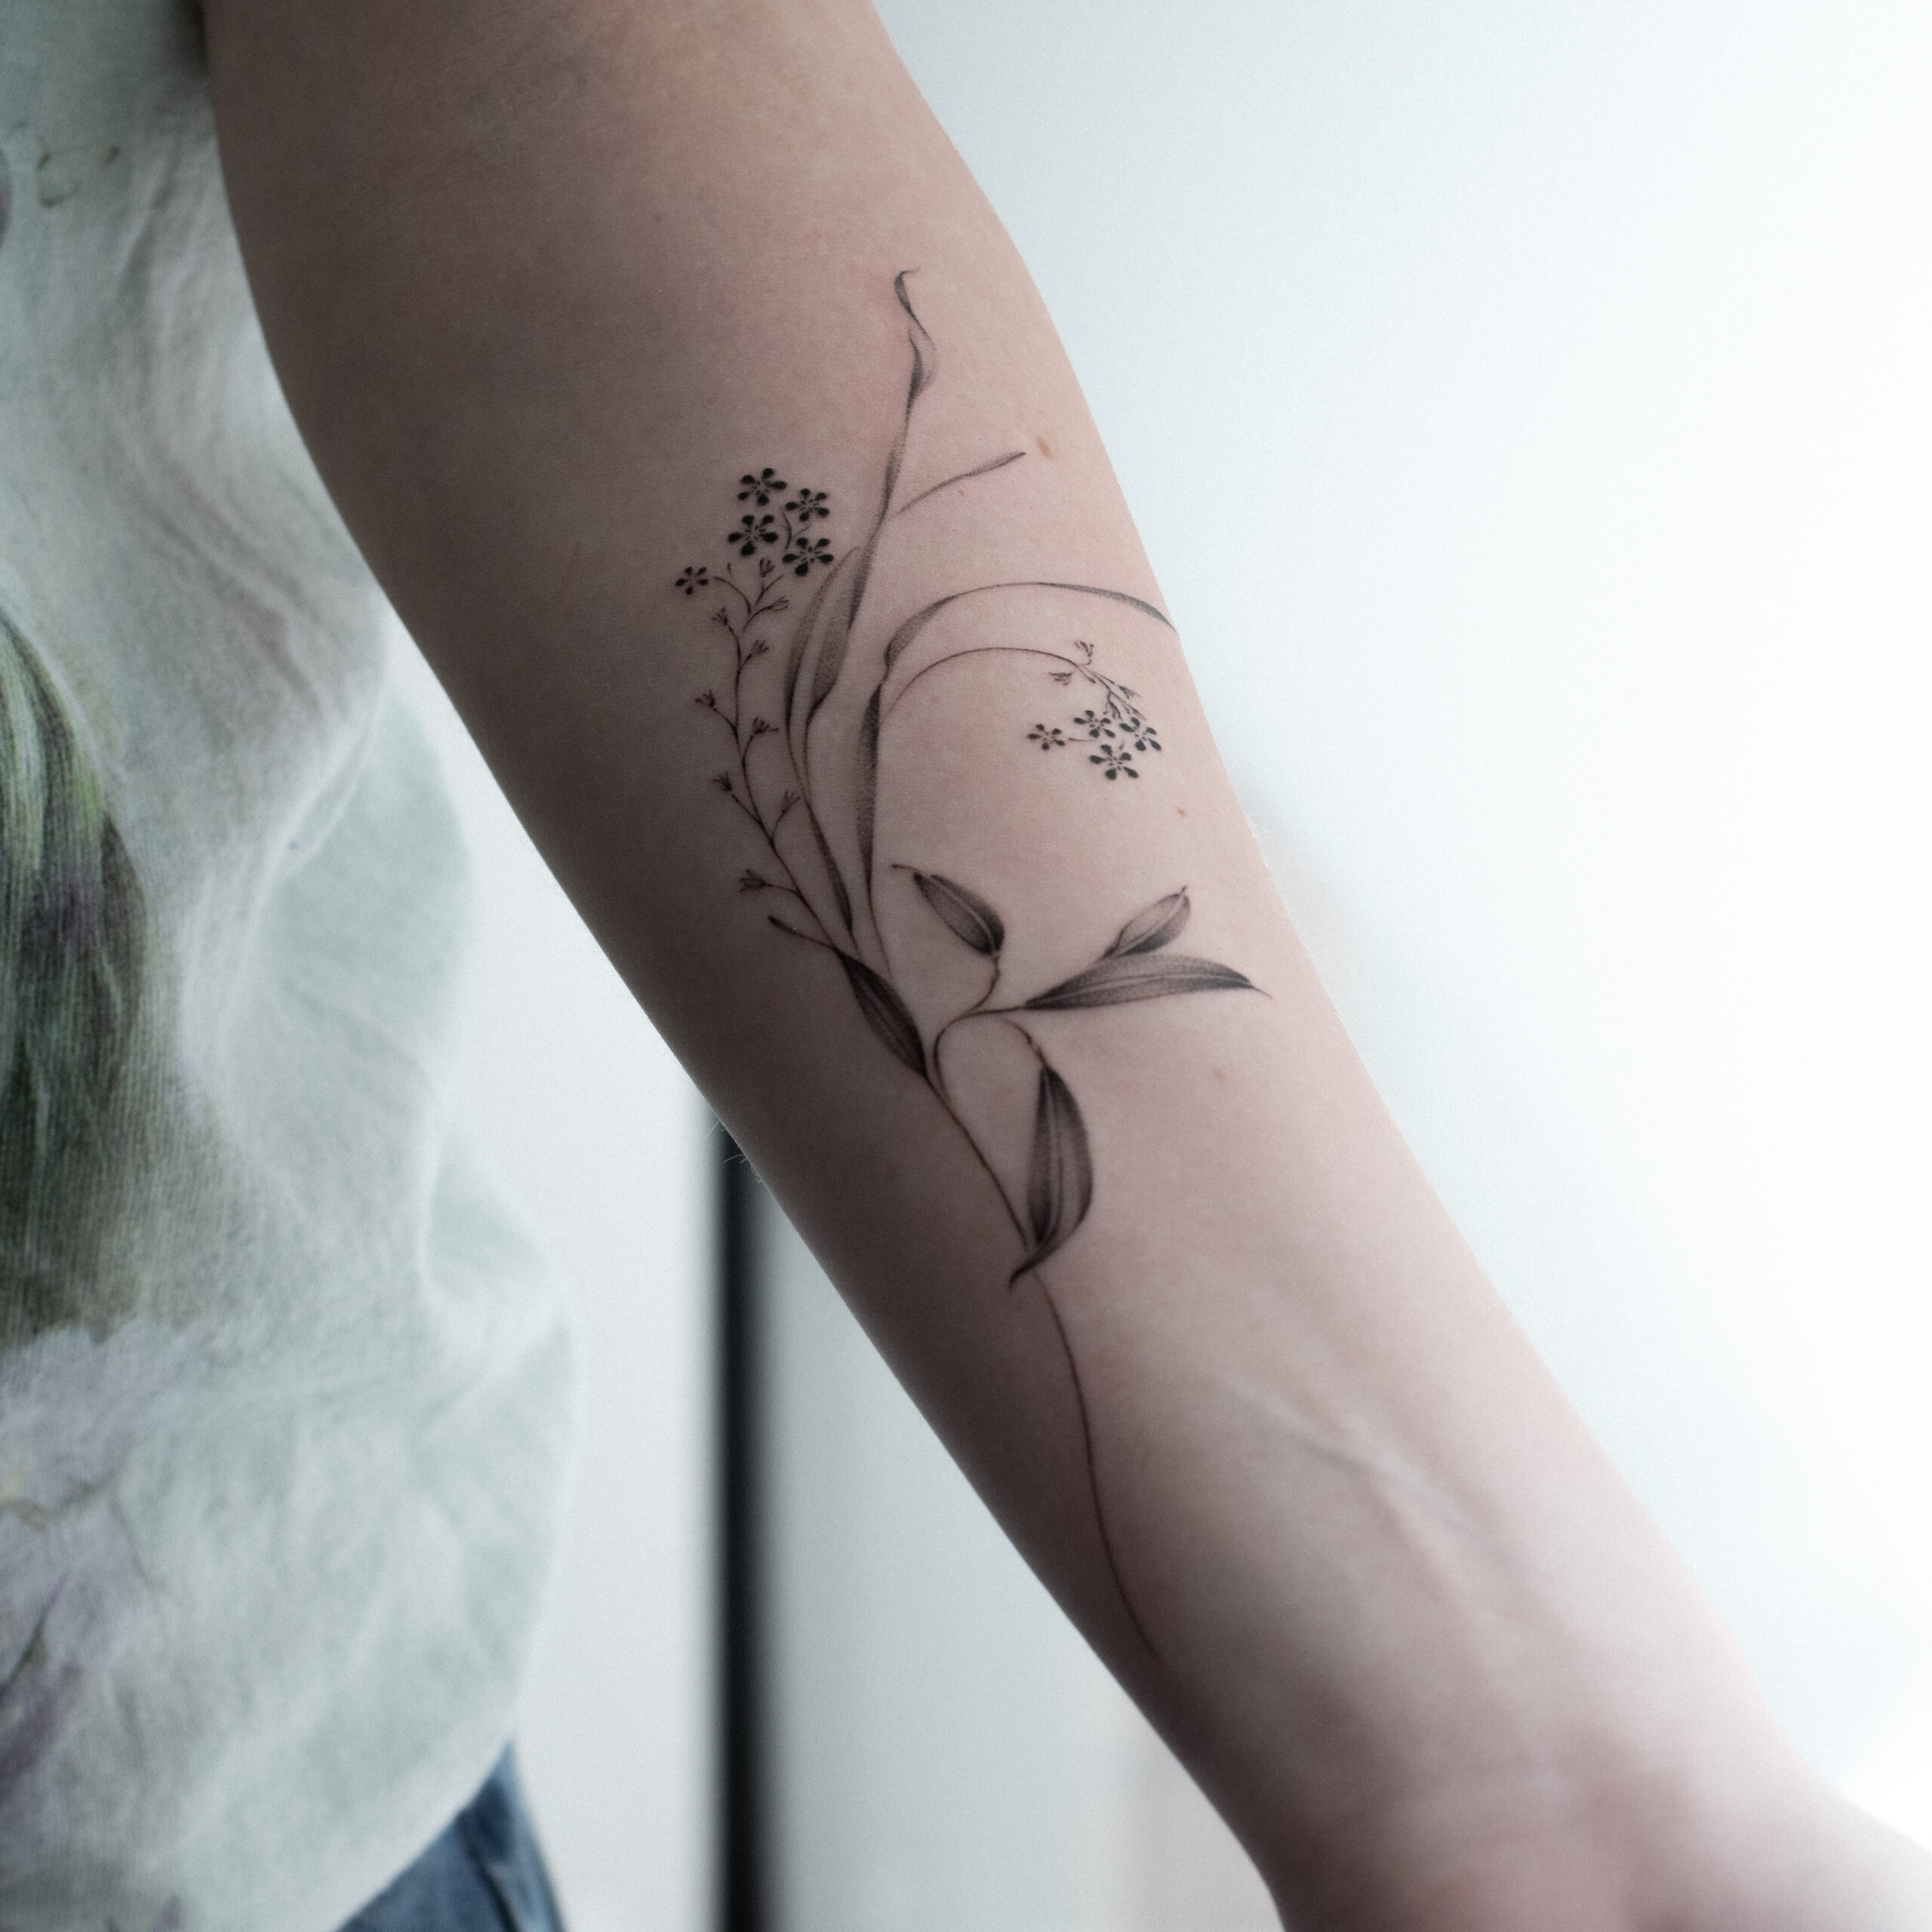  Floral tattoo | Forget-me-not flowers 1